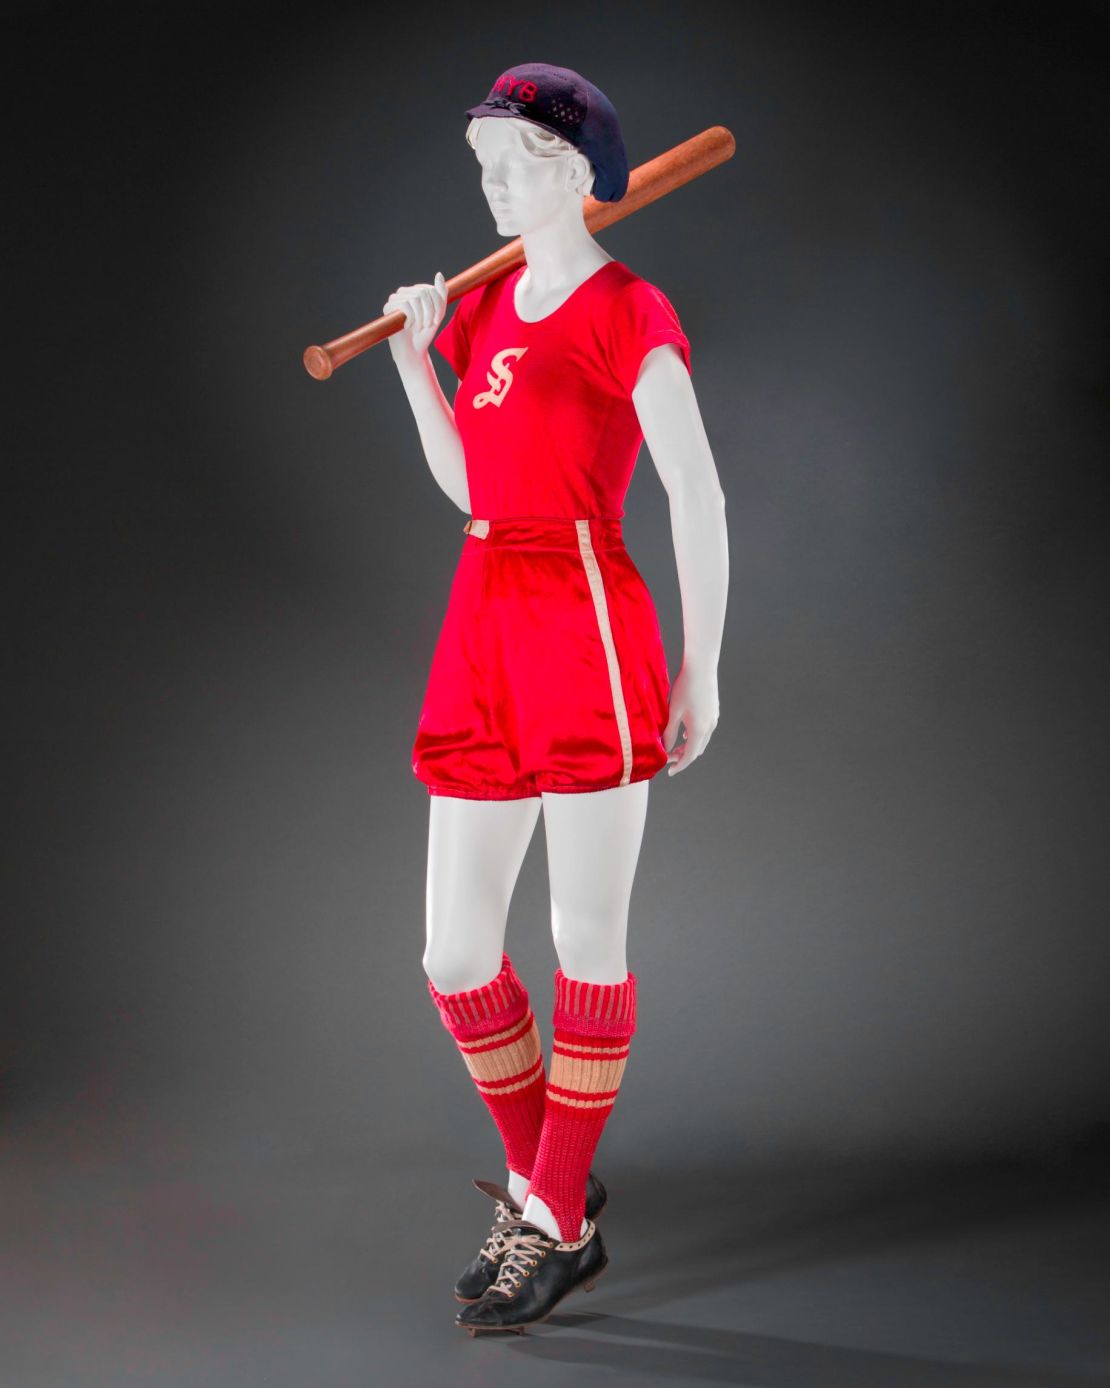 A 1930s baseball uniform with Spalding cleats.